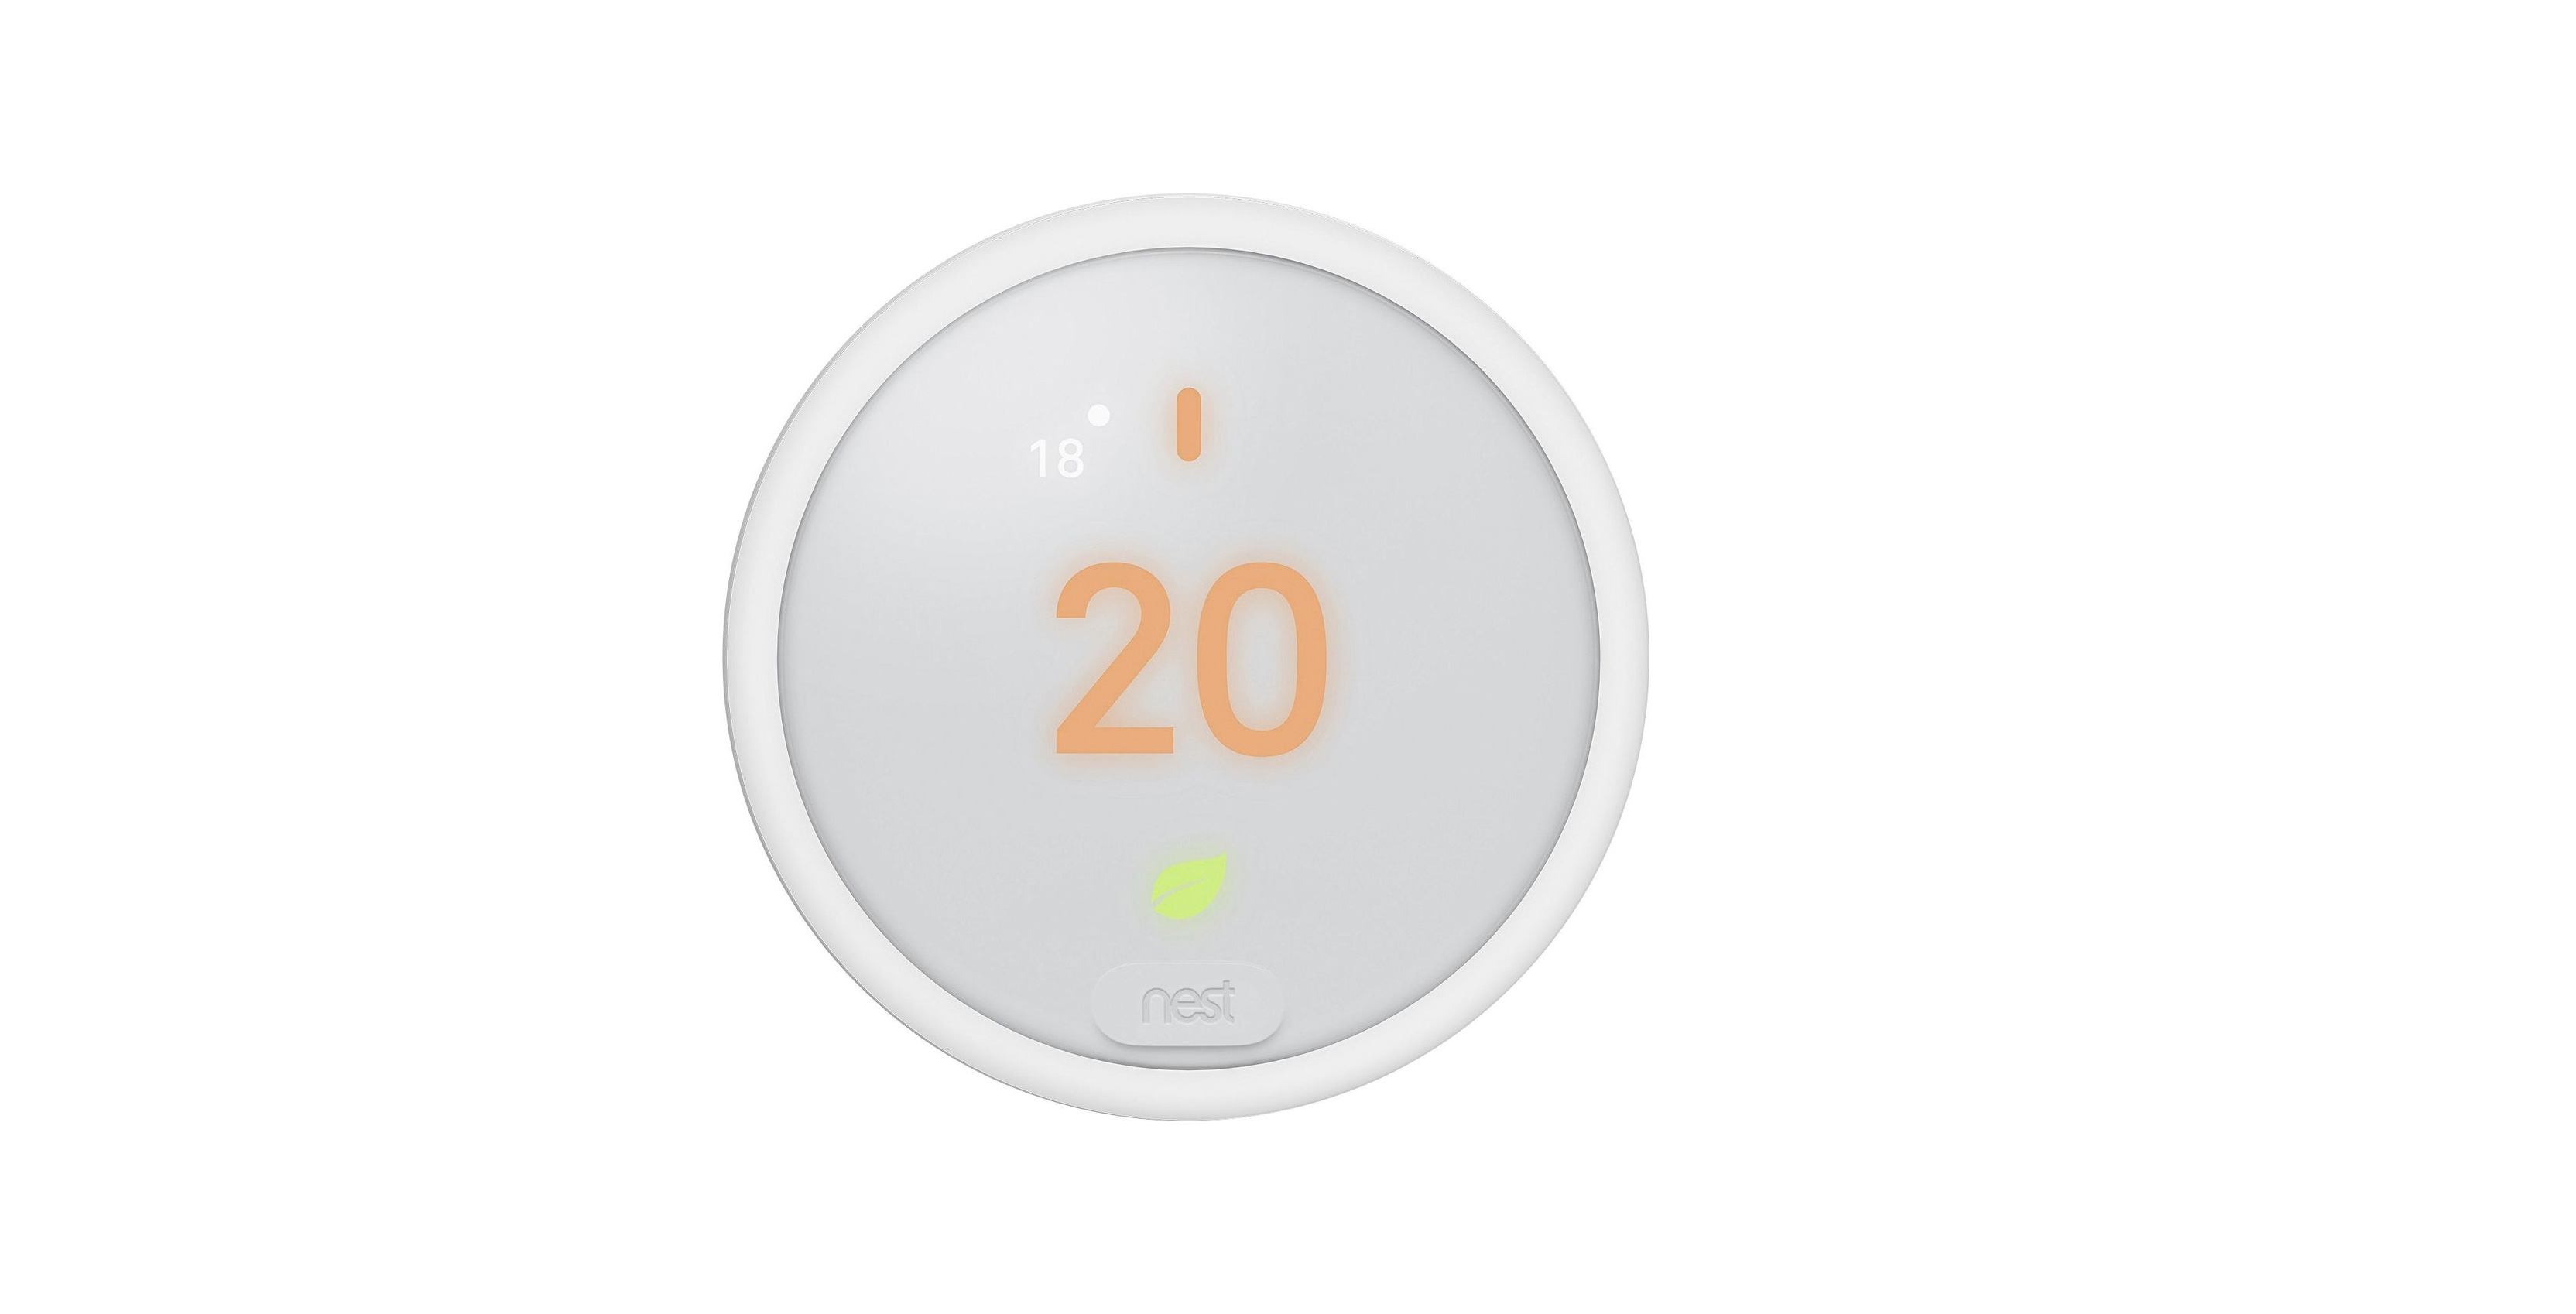 An image showing the leaked Nest thermostat